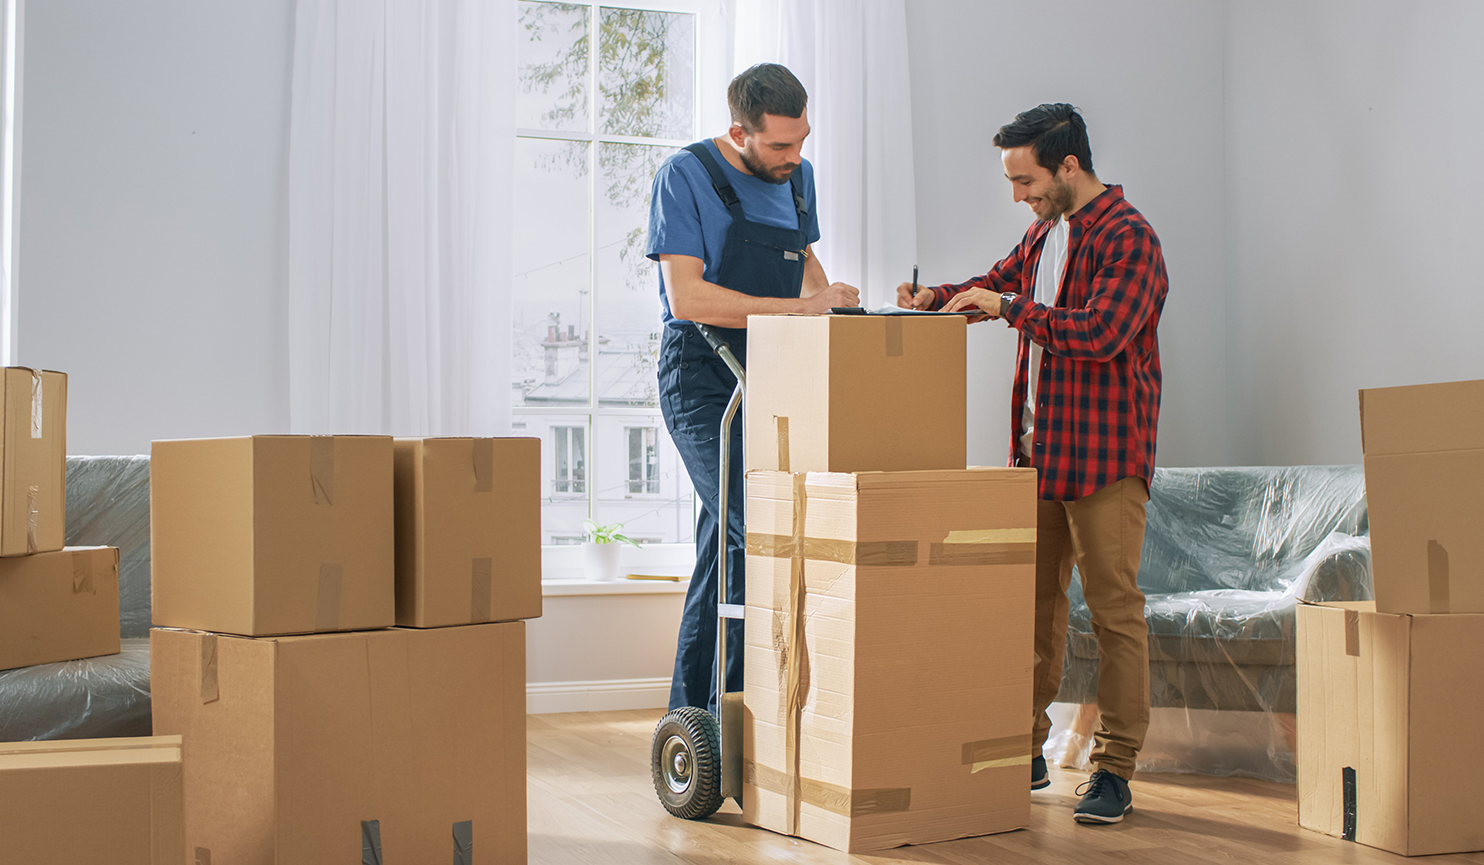 Top 10 Villa Movers Companies: Reviews and Comparisons